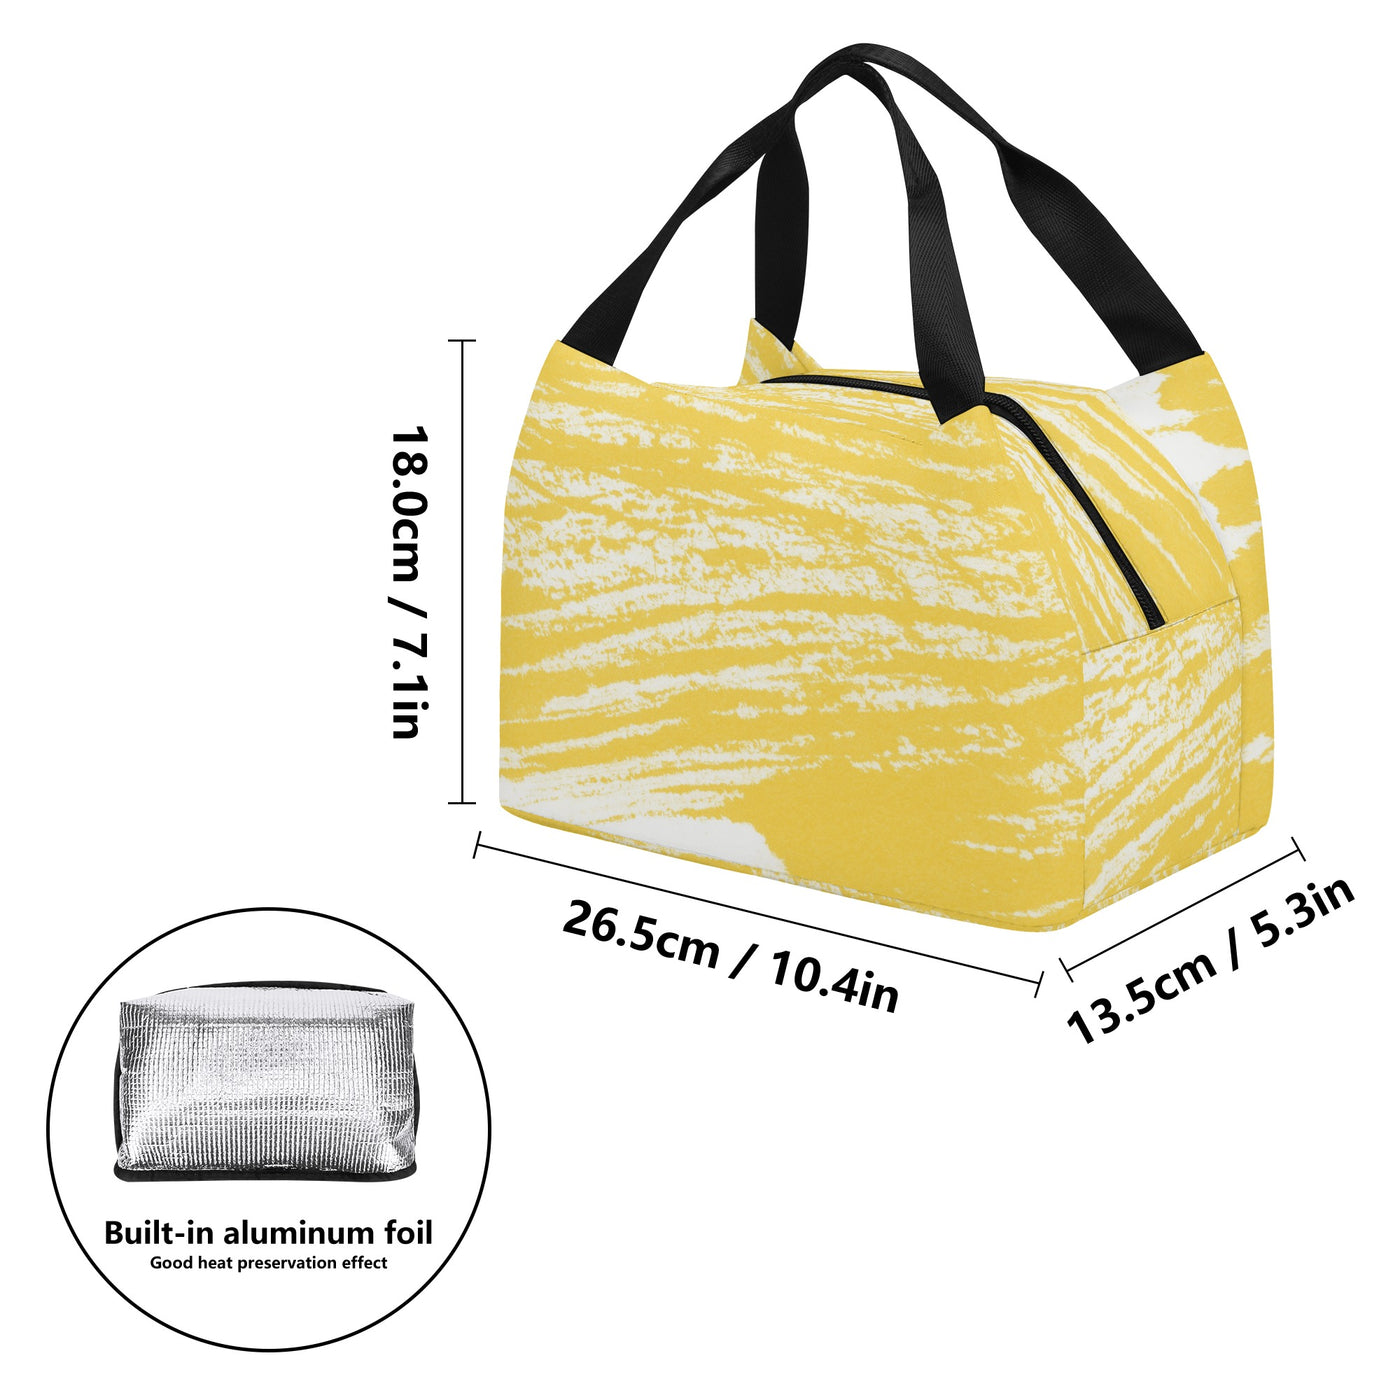 Portable Tote Lunch Bag (45 days pre-order)